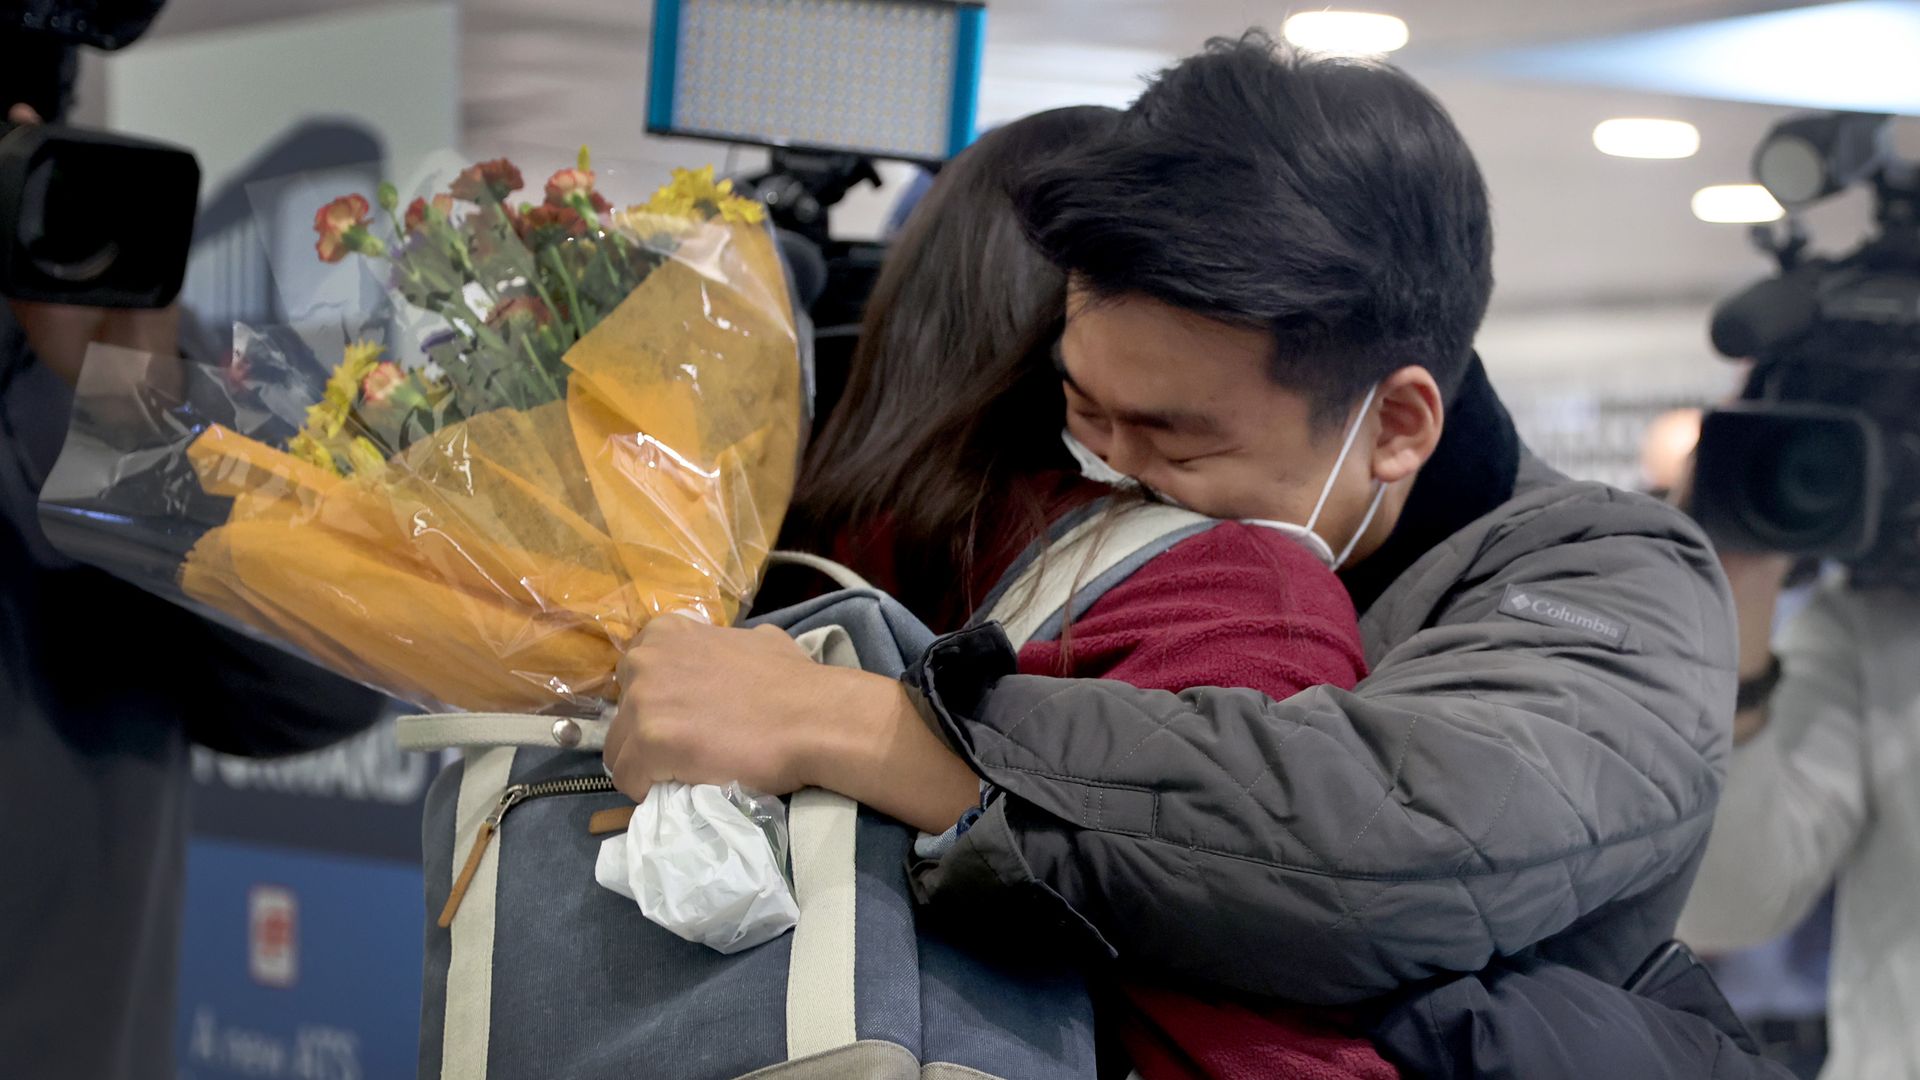 Yerin Hong gets a hug from her boyfriend, Soomin Kim, after she arrived on a flight from Germany at O'Hare International Airport on November 08, 2021 in Chicago, Illinois.